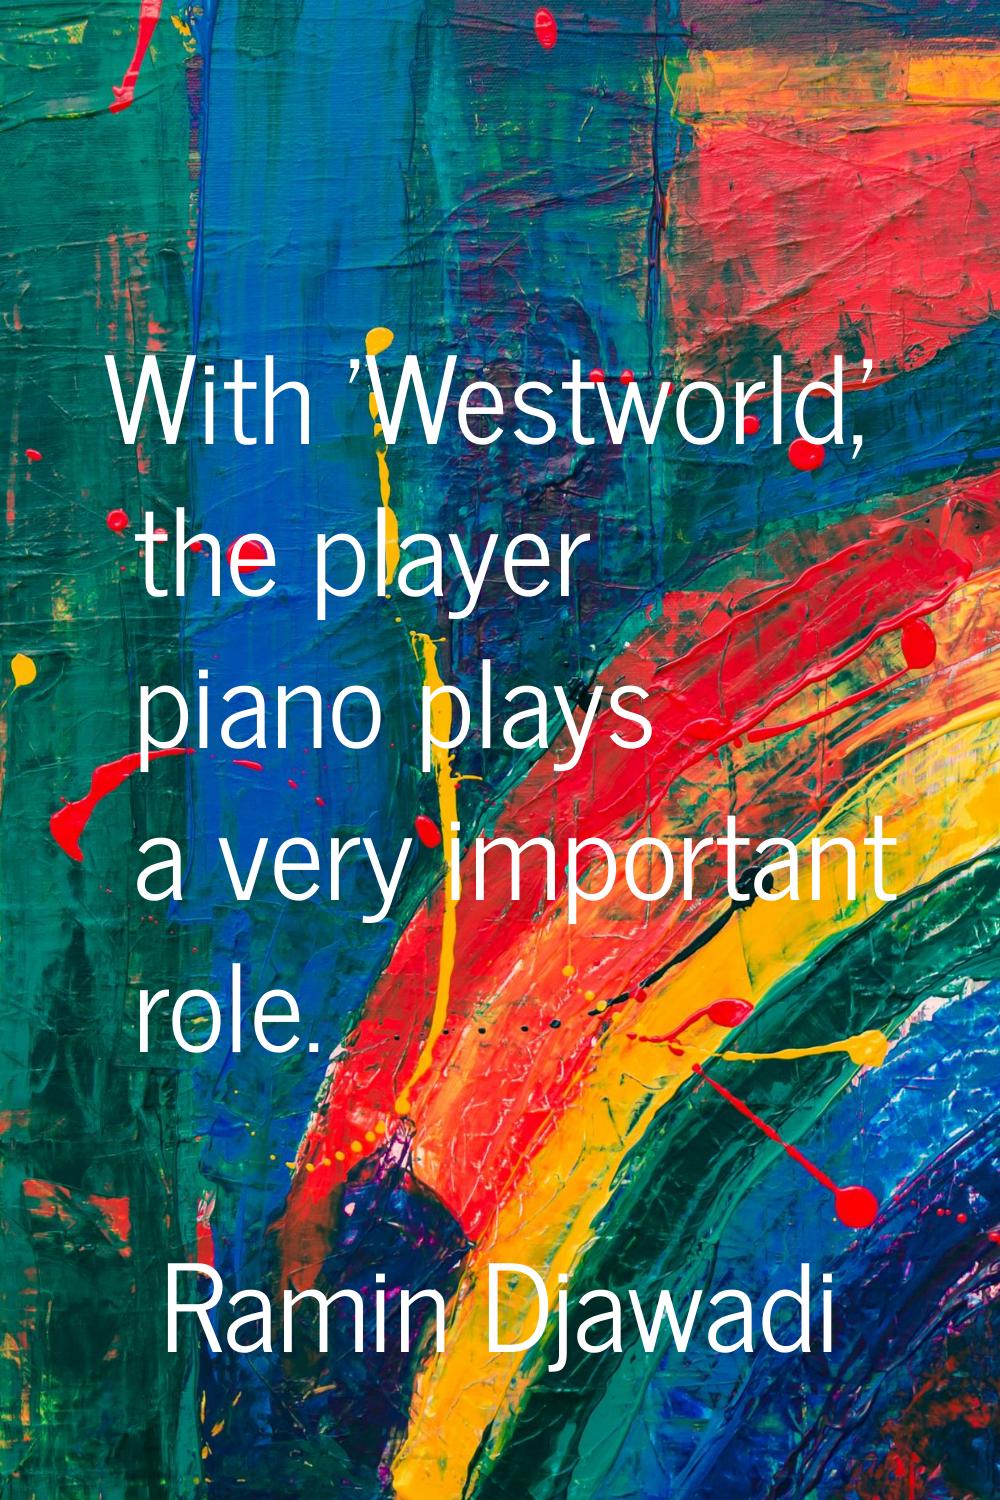 With 'Westworld,' the player piano plays a very important role.